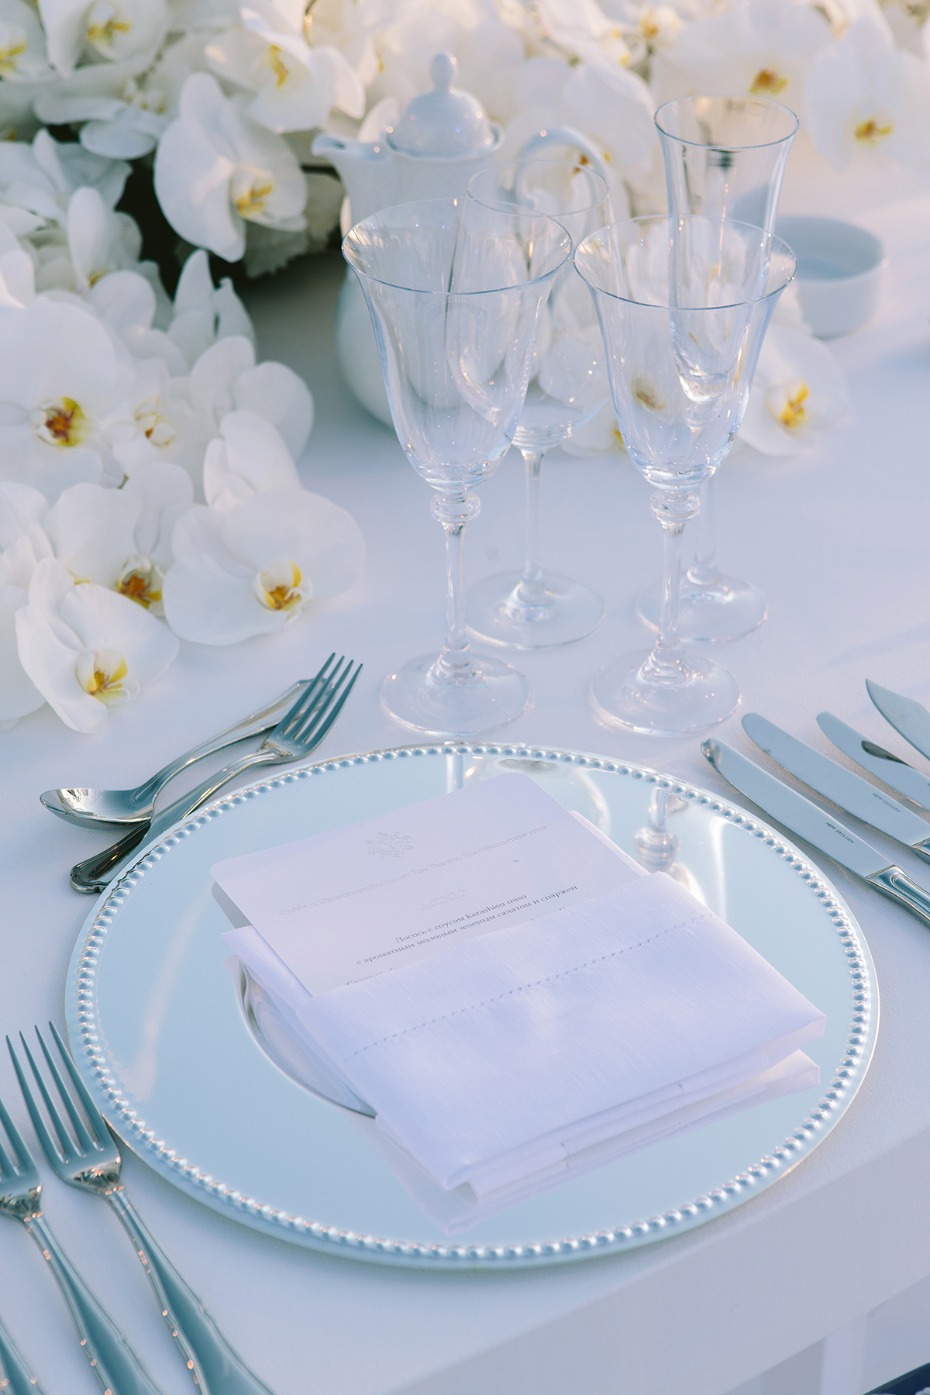 All white wedding place setting